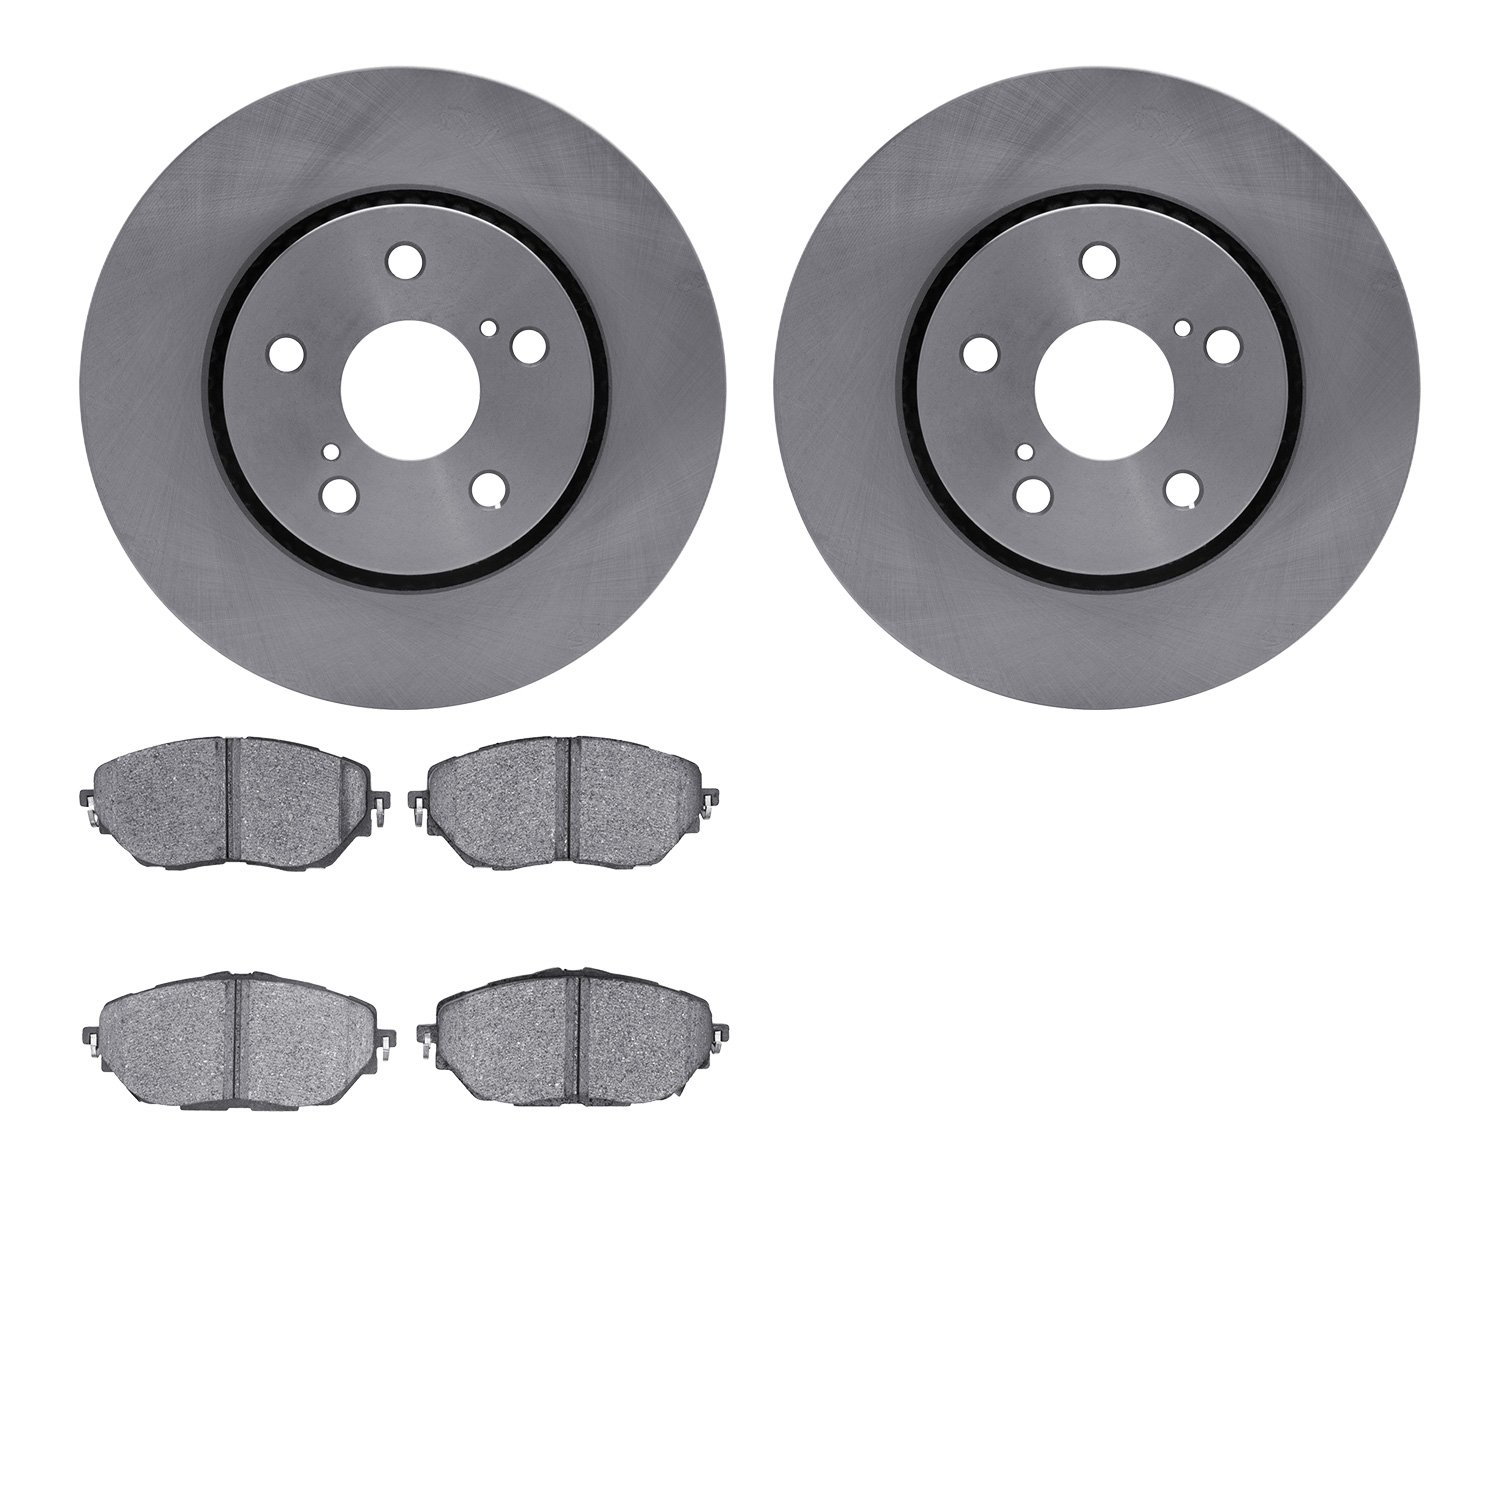 6302-76183 Brake Rotors with 3000-Series Ceramic Brake Pads Kit, Fits Select Lexus/Toyota/Scion, Position: Front